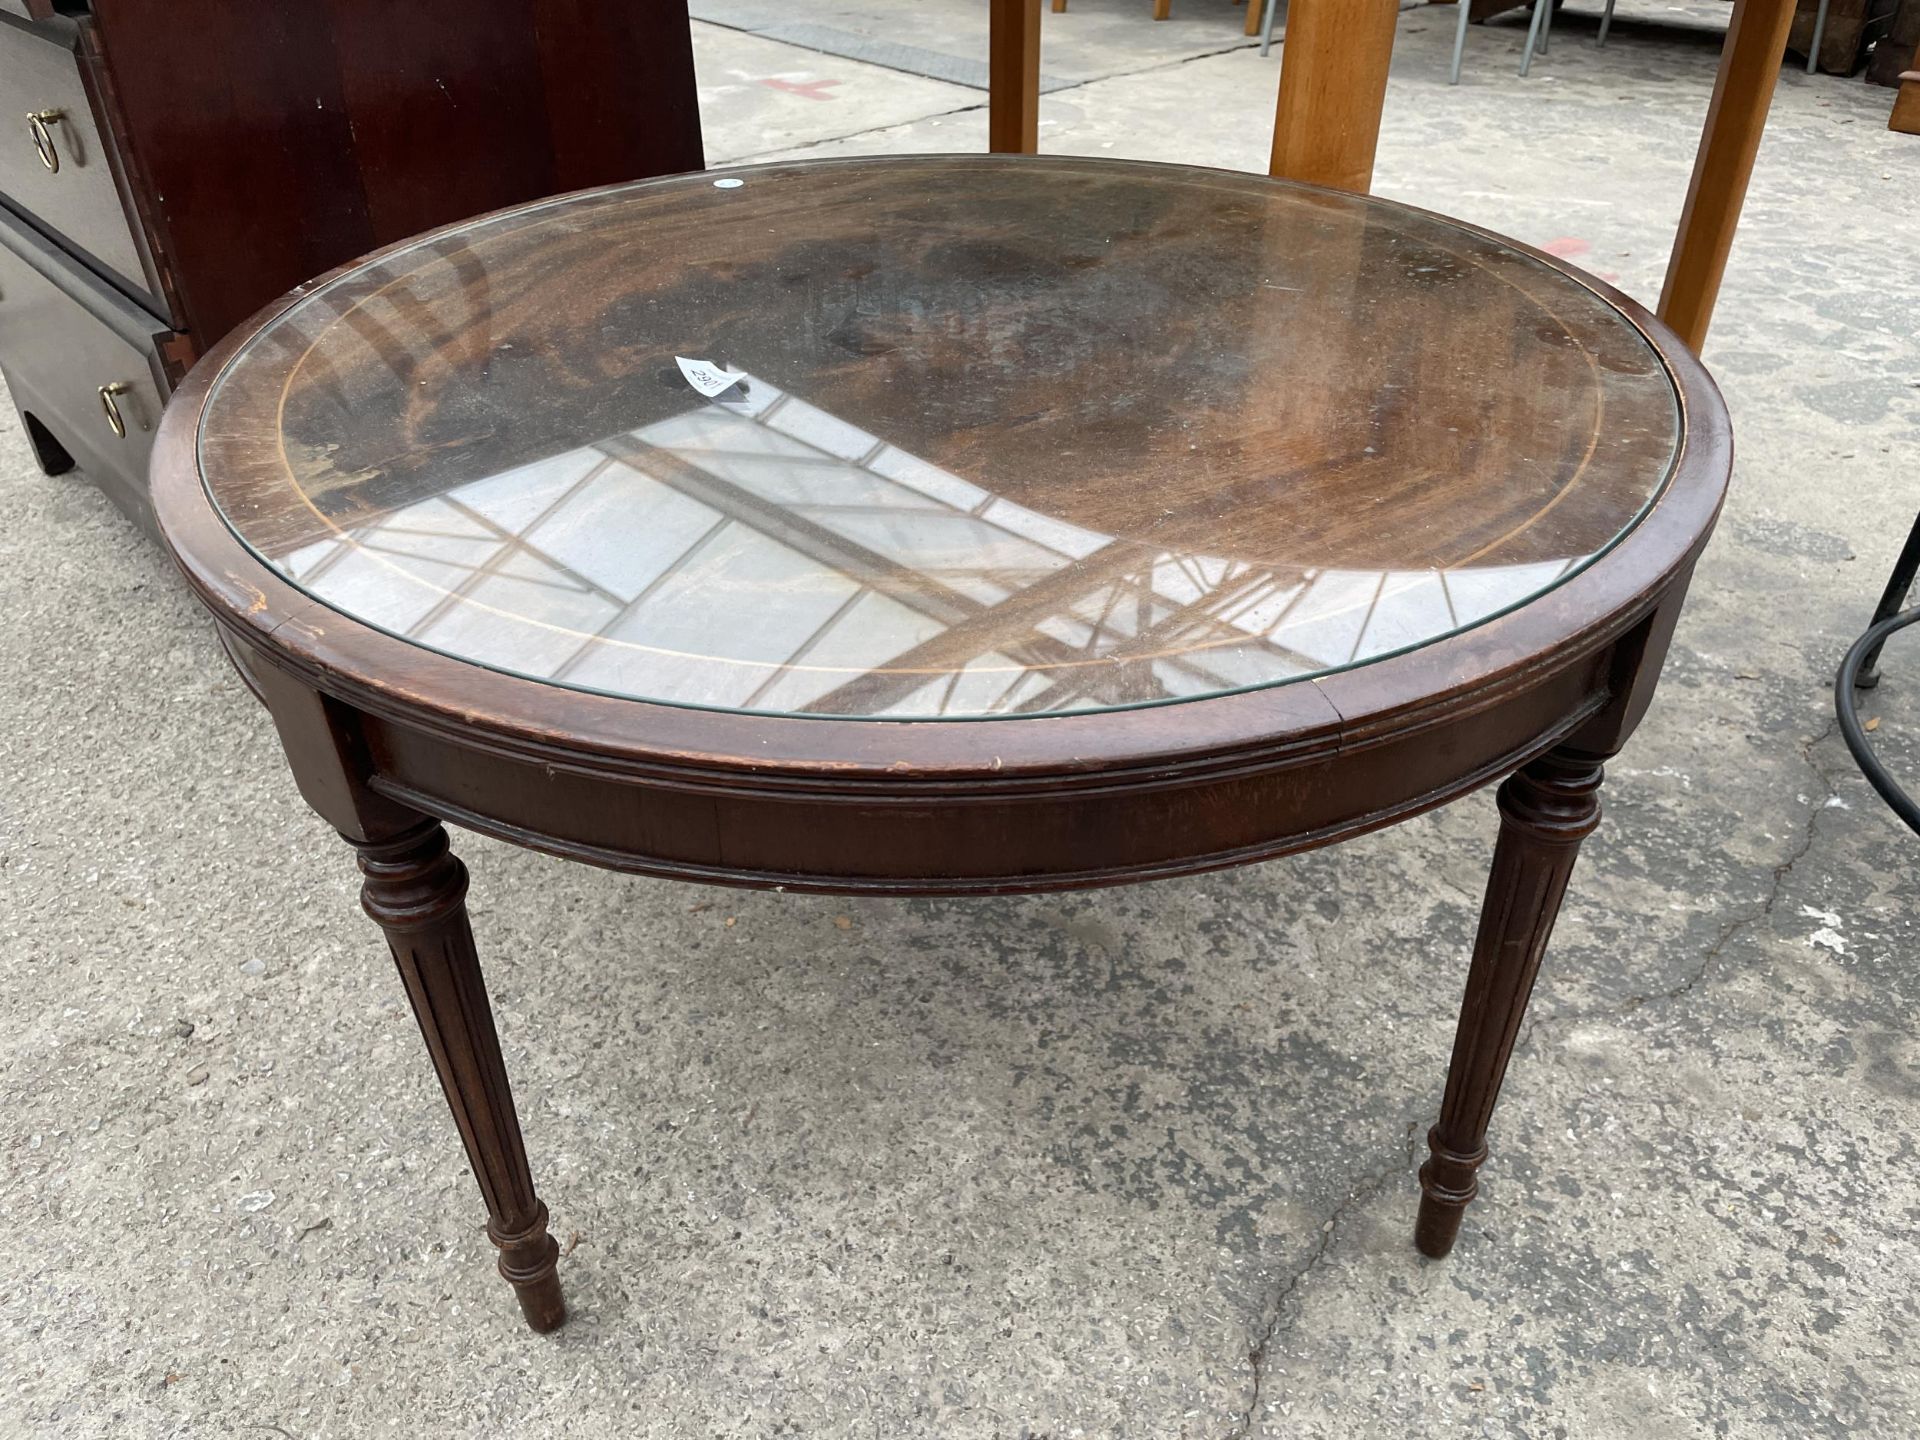 A MODERN 29" DIAMETER MAHOGANY COFFEE TABLE ON TURNED AND FLUTED LEGS